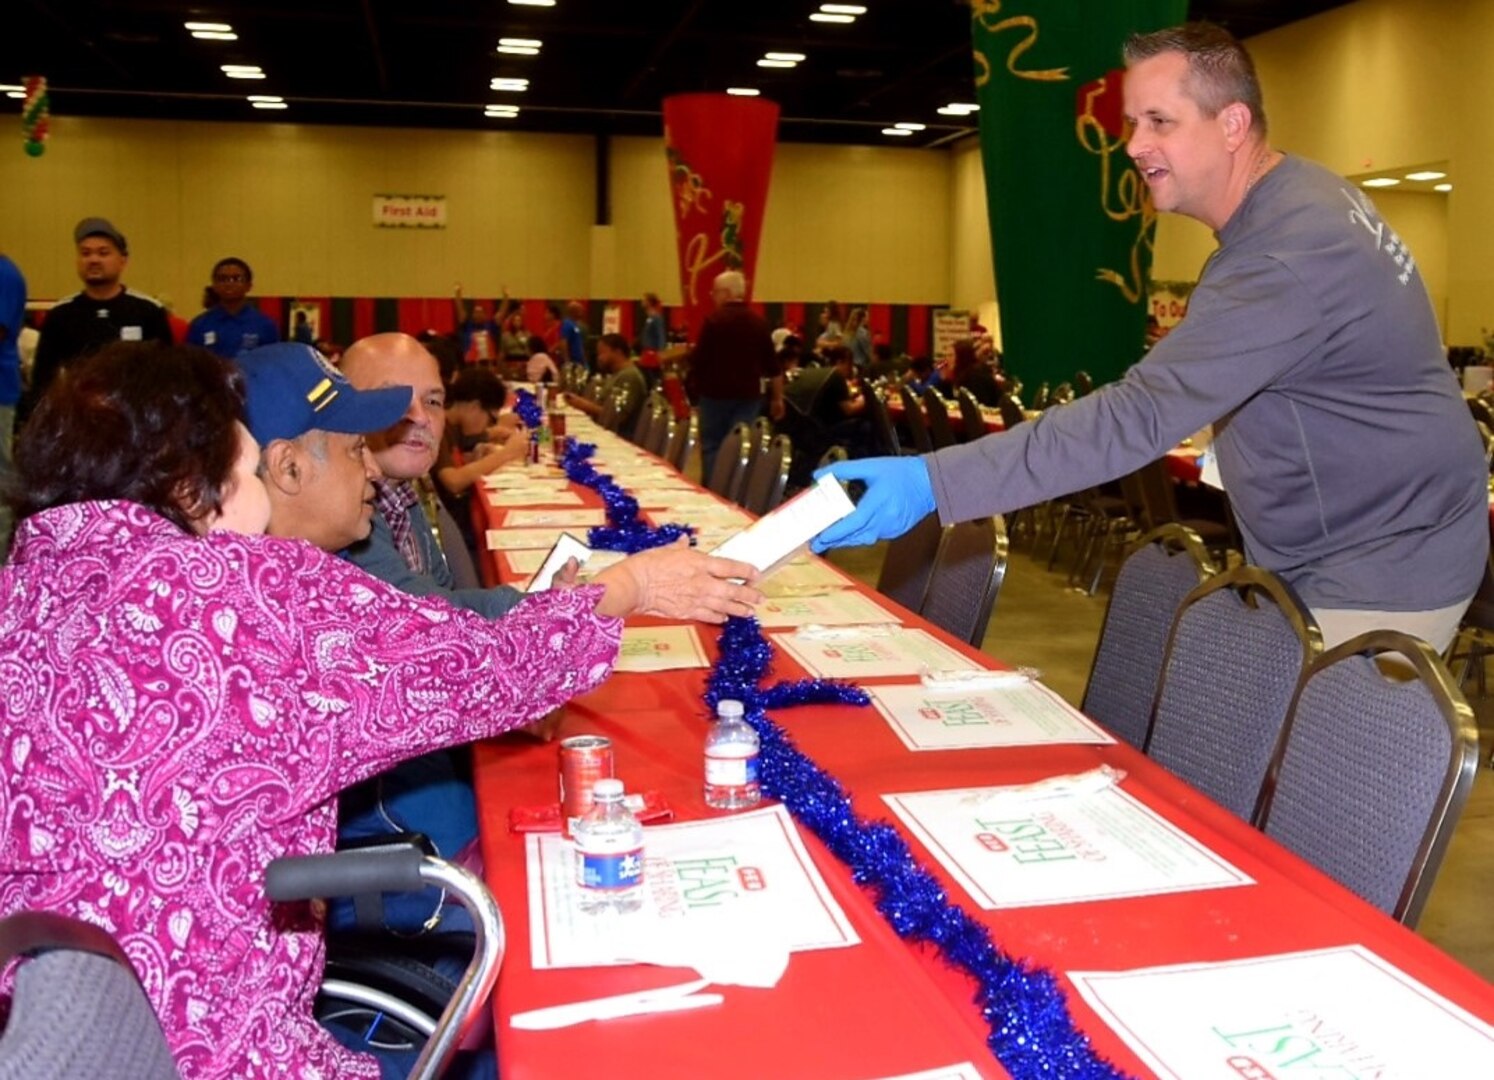 Lt. Col. Marc Mulkey, 733rd Training Squadron commander, passes out boxes of cookies to one of the 10,000 guests at 
H-E-B’s 26th Annual Feast of Sharing Dec. 23, 2018, at the Henry B. Gonzalez Convention Center in San Antonio. Mulkey brought his wife and children to help serve at the event and he said that he hopes to bring his family to serve again next year.